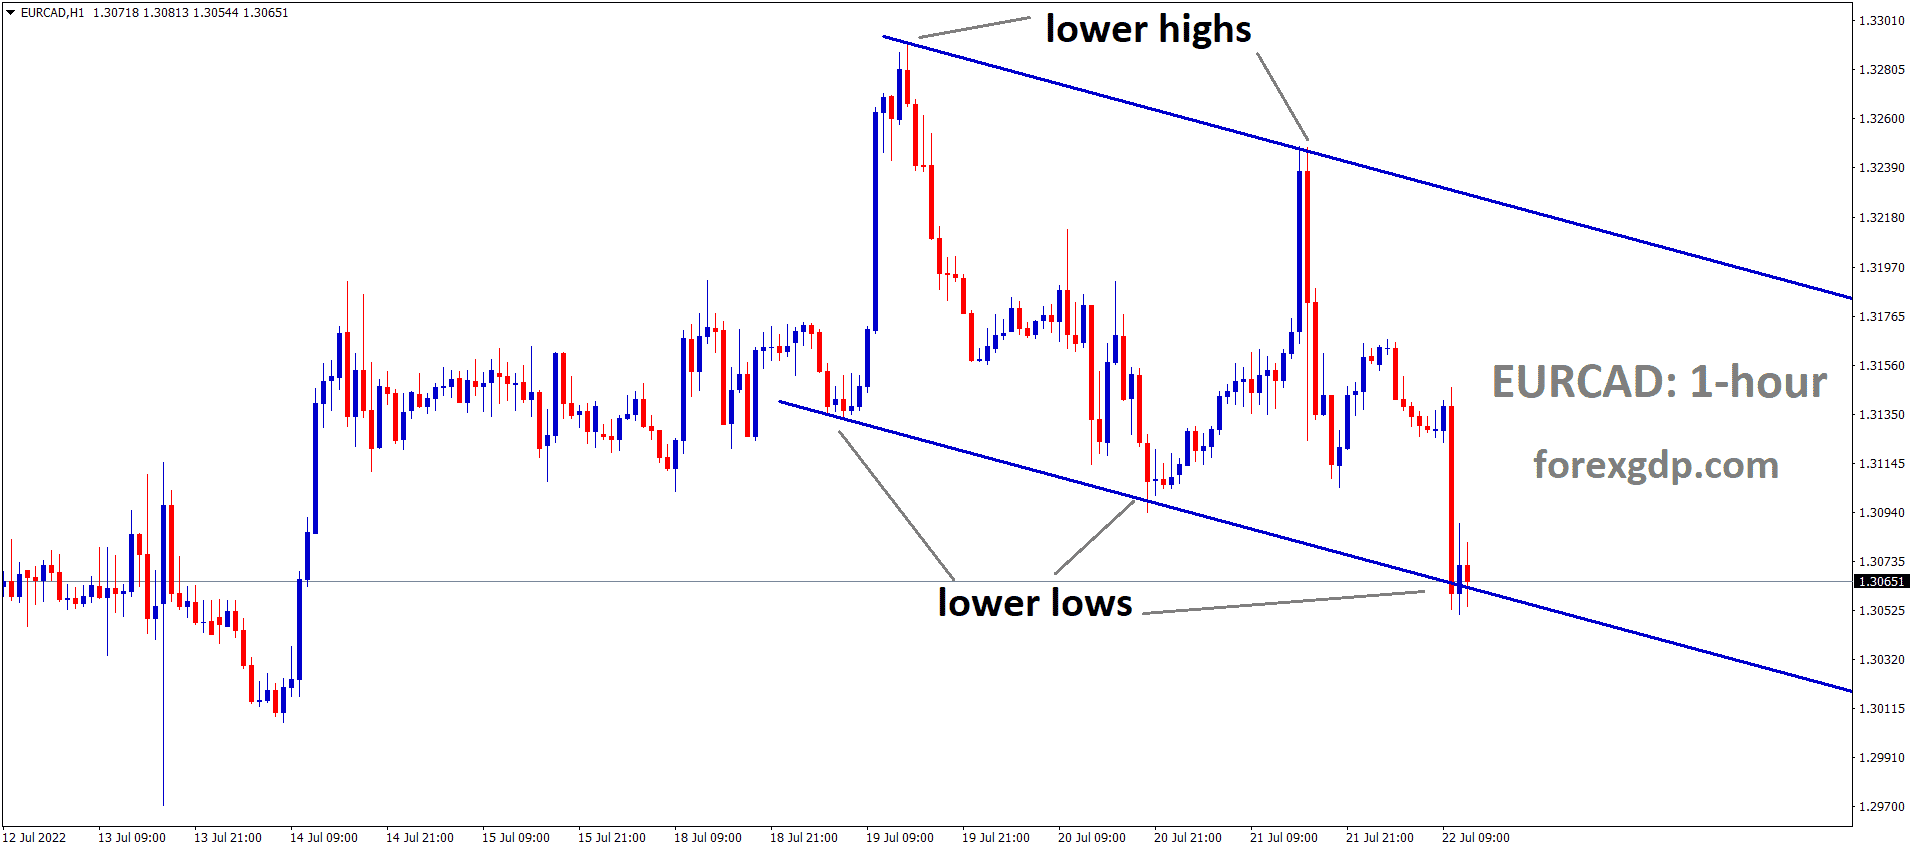 EURCAD is moving in the Descending channel and the Market has reached the Lower low area of the channel 1